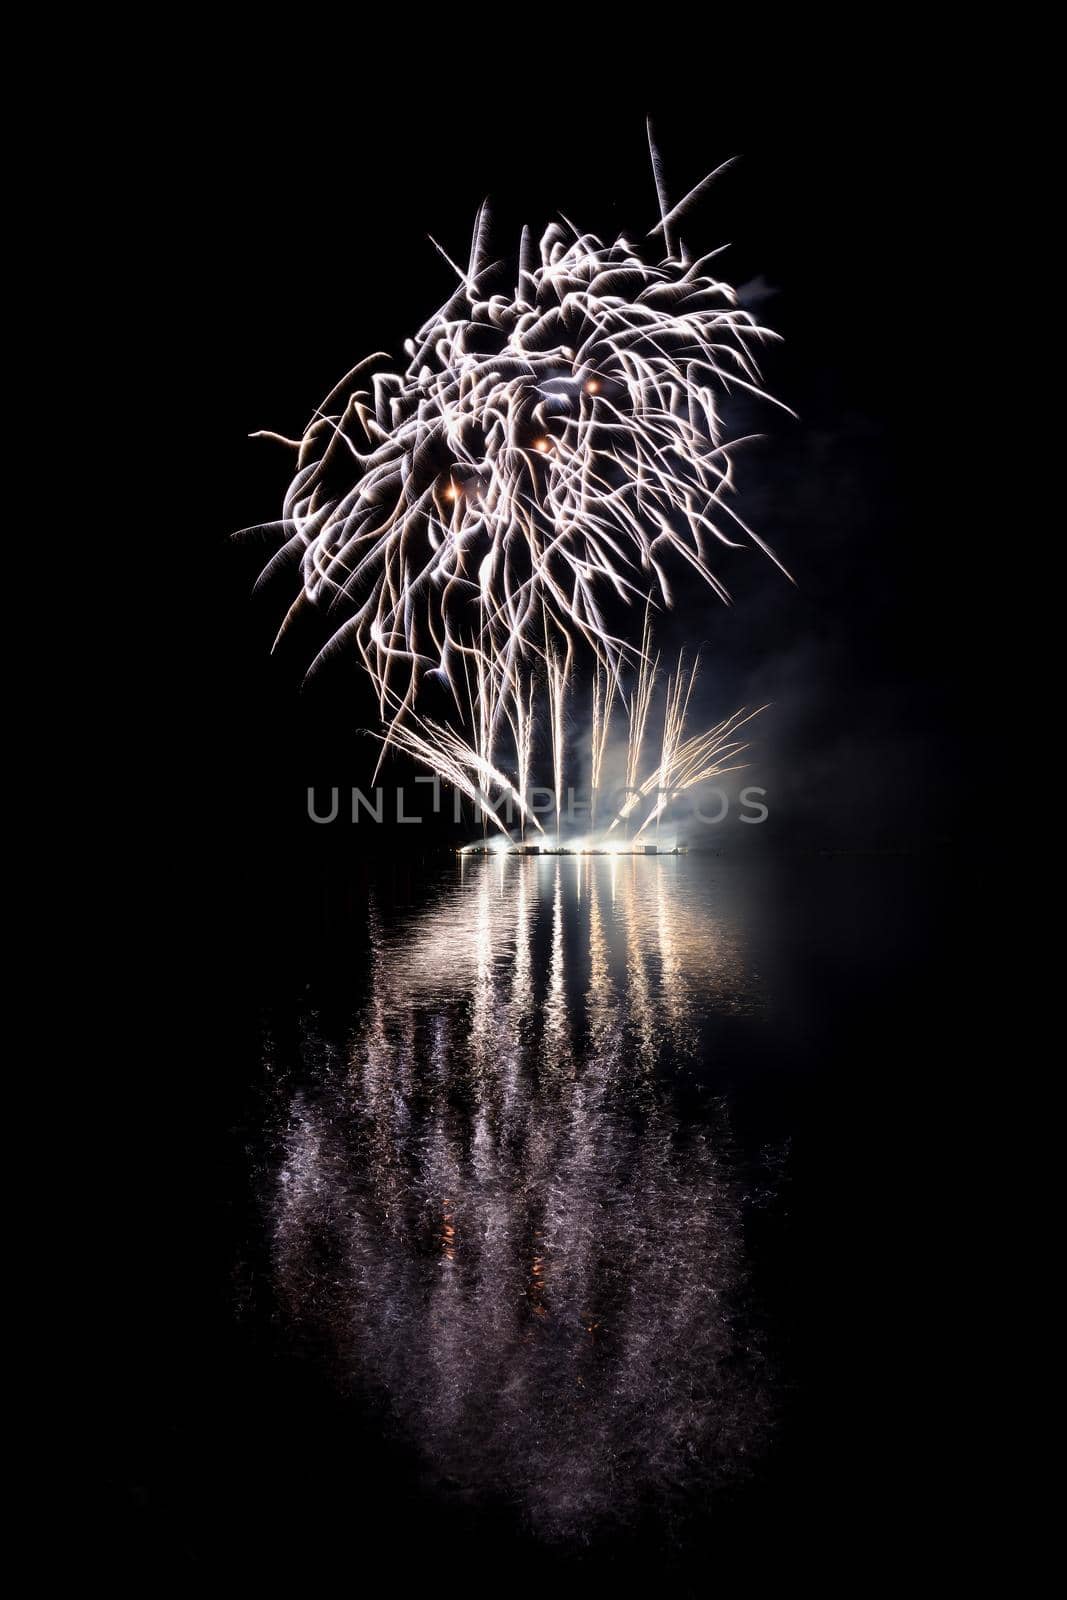 Beautiful colorful fireworks with reflections in water. Brno dam, the city of Brno-Europe. International Fireworks Competition.